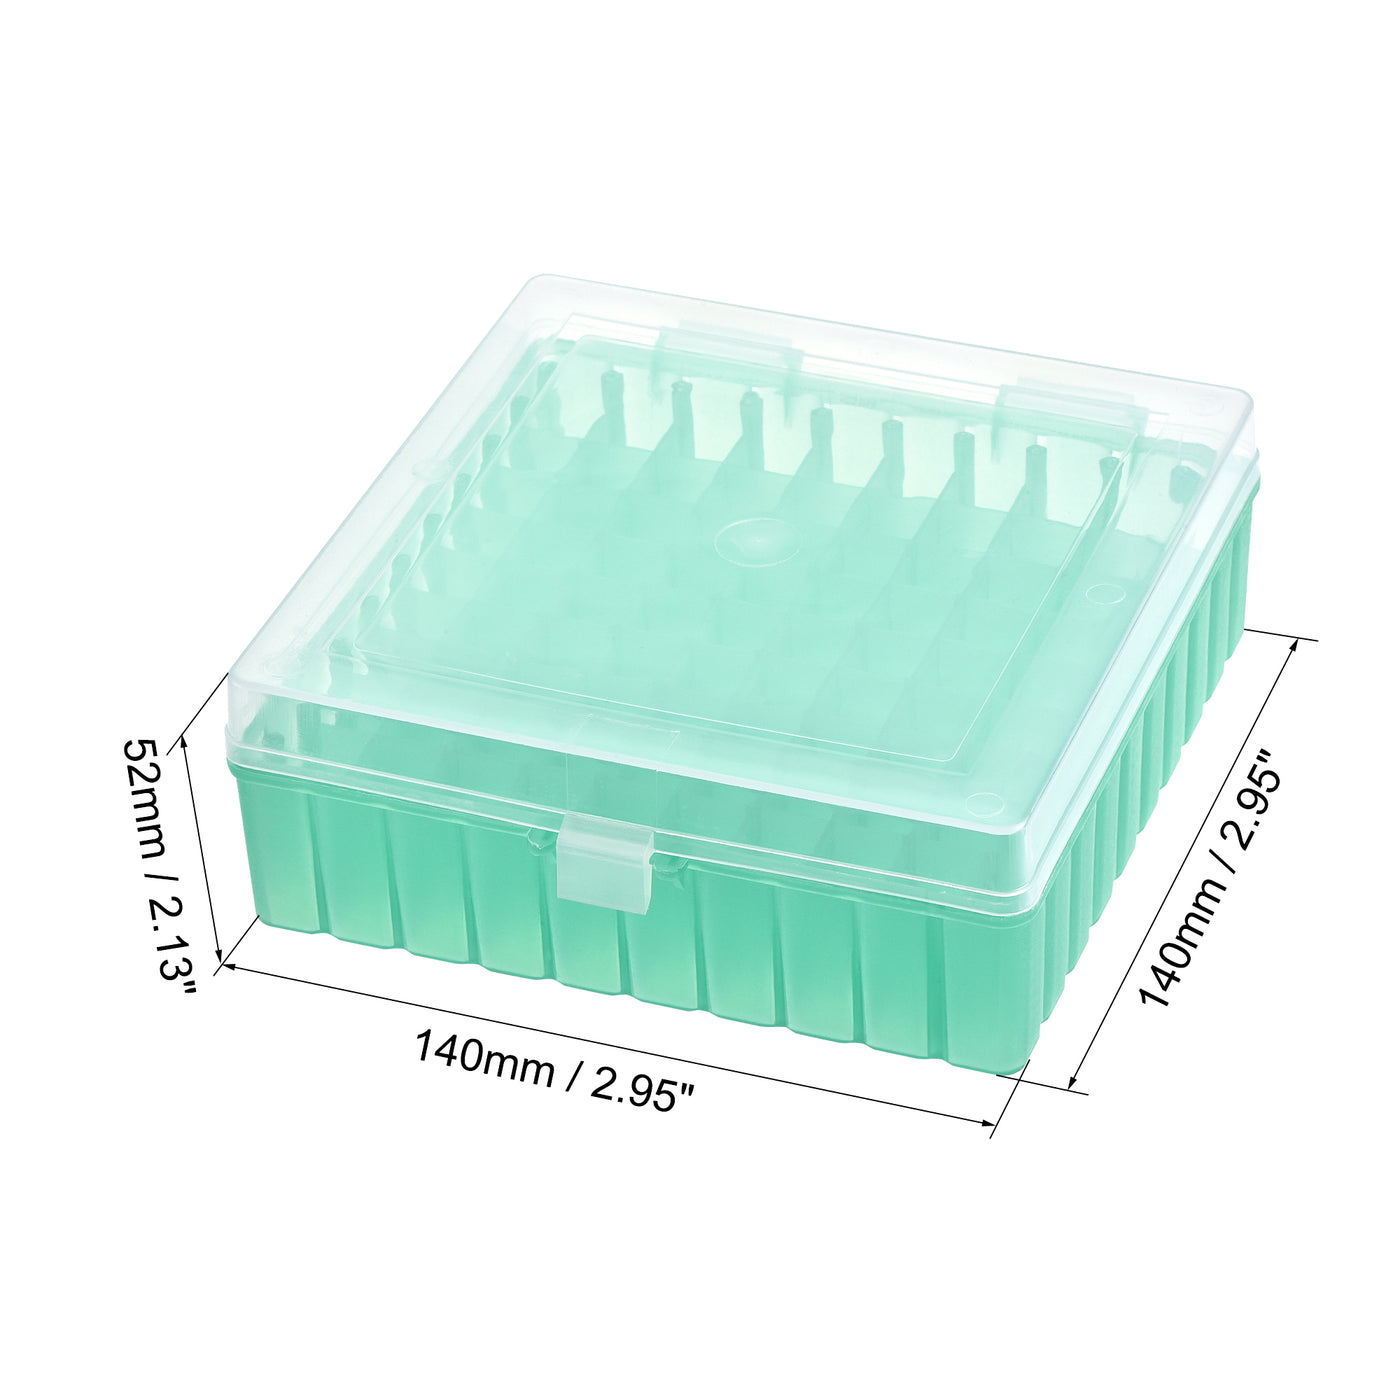 uxcell Uxcell Freezer Tube Box 100 Places Polypropylene Plastic Lockable Holder Rack for 1.5/1.8/2ml Microcentrifuge Tubes, Green